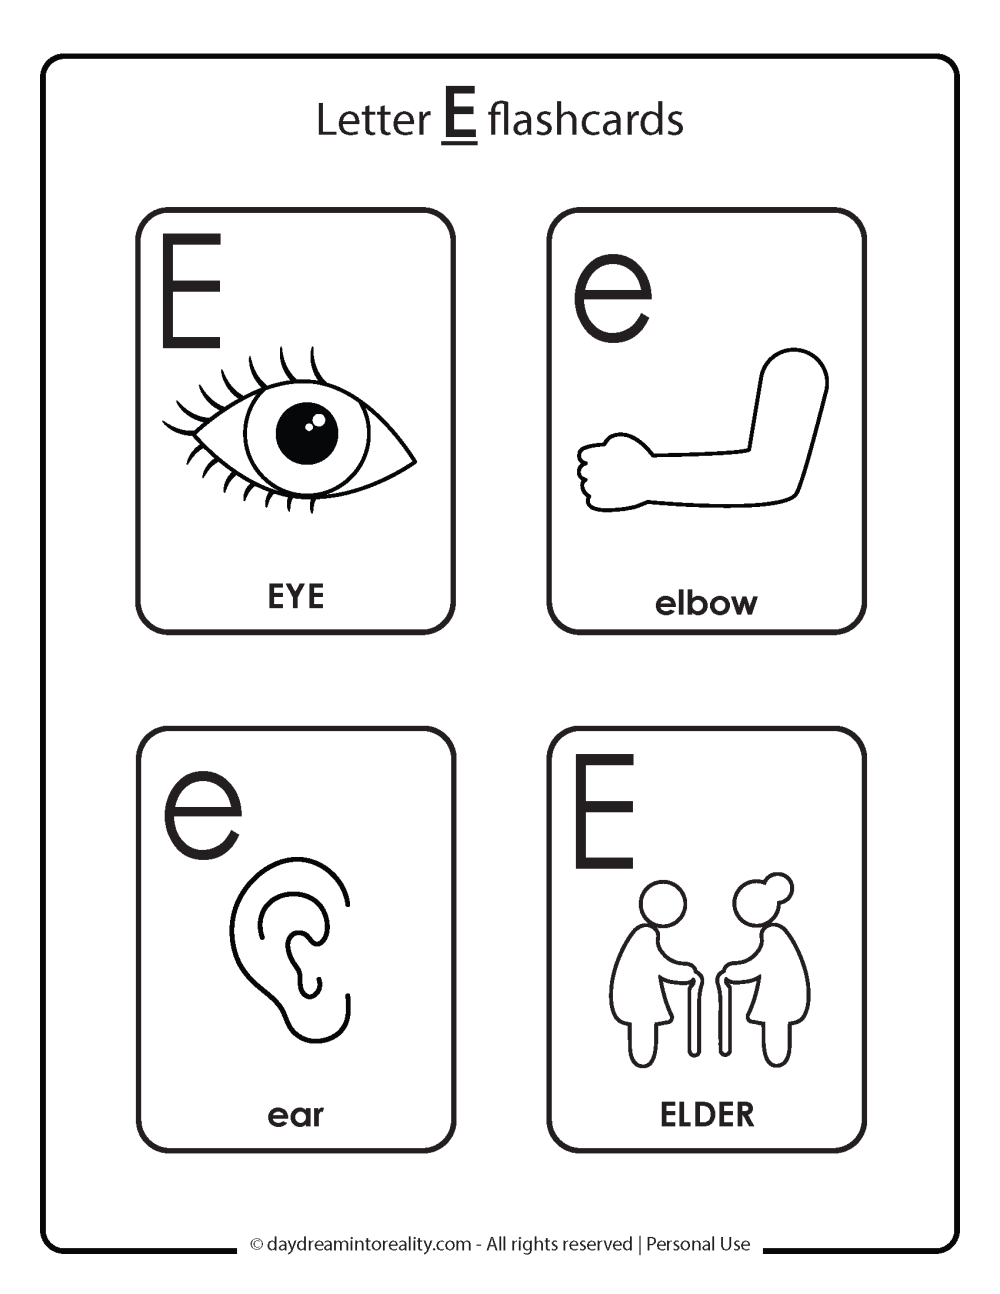 Letter E flashcards free printables. 